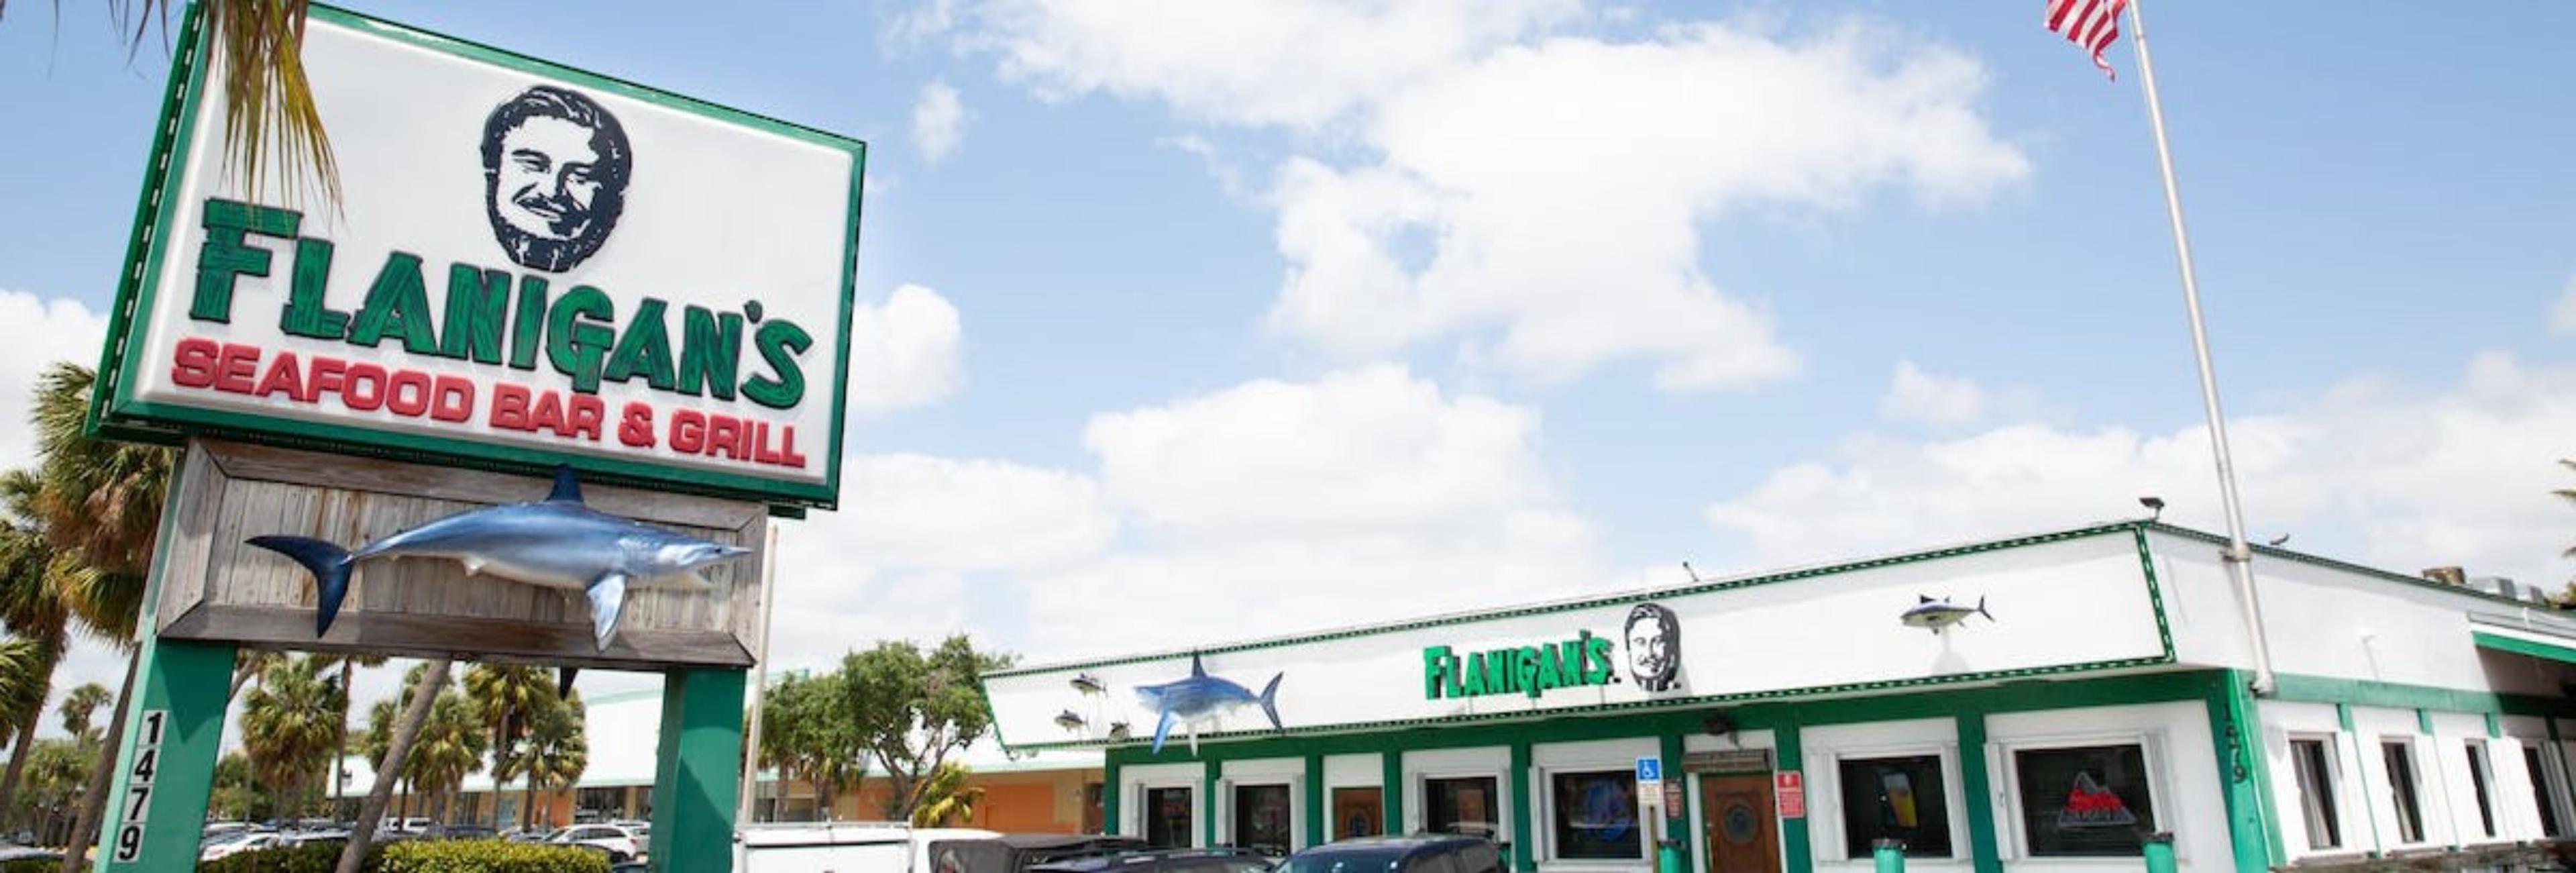 Flanigan's Seafood Bar & Grill - Pinecrest